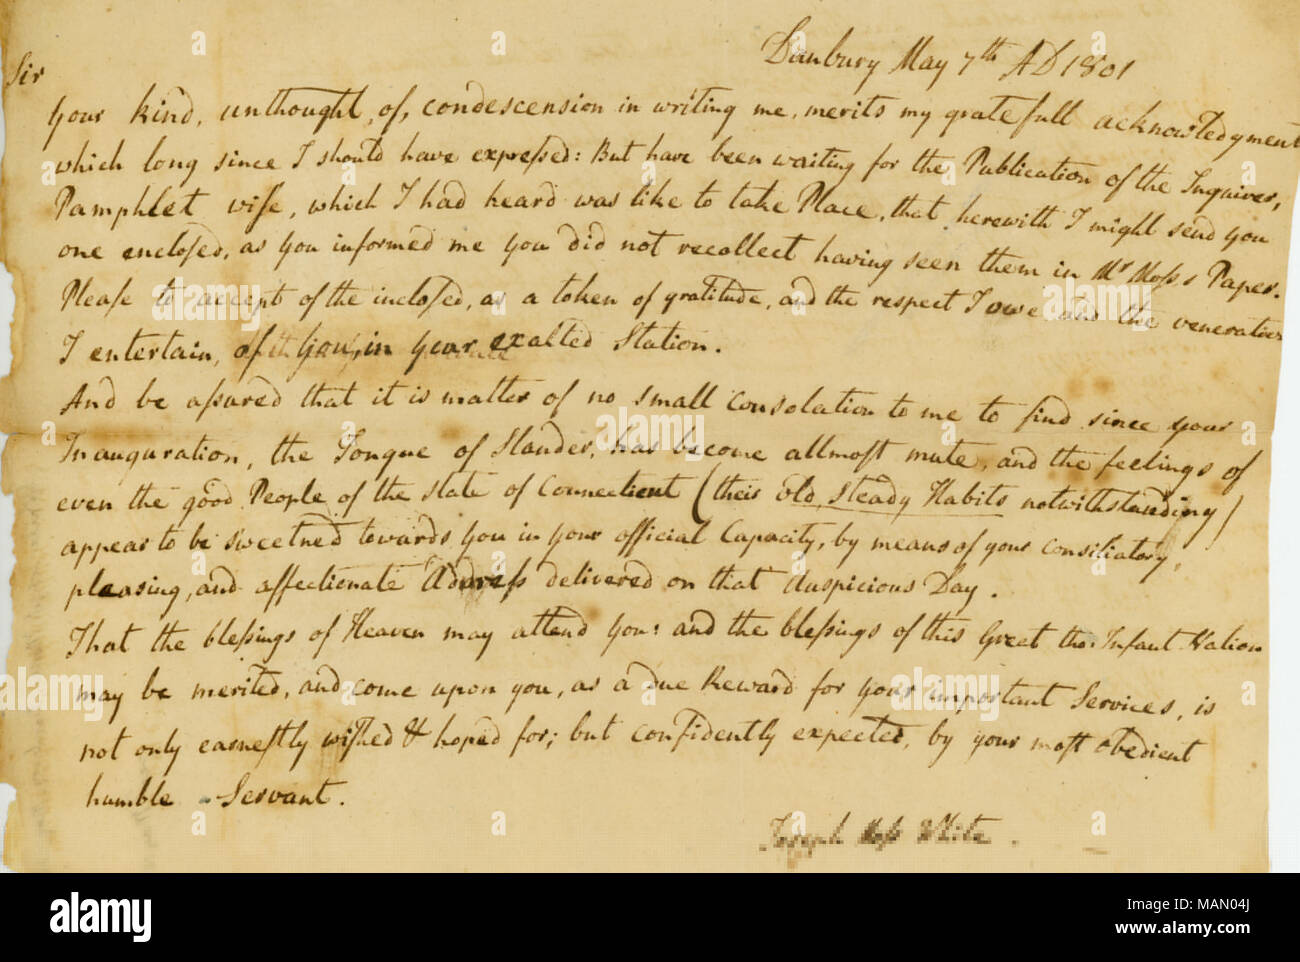 Letter from Joseph Moss White to Thomas Jefferson, sharing that since Jefferson’s inauguration ''the tongue of slander has become almost mute and the feelings of even the good people of the state of Connecticut appear to be sweetened towards you'', page 1, May 7, 1801. Thomas Jefferson Papers, Missouri History Museum Archives, St. Louis, Missouri. Stock Photo